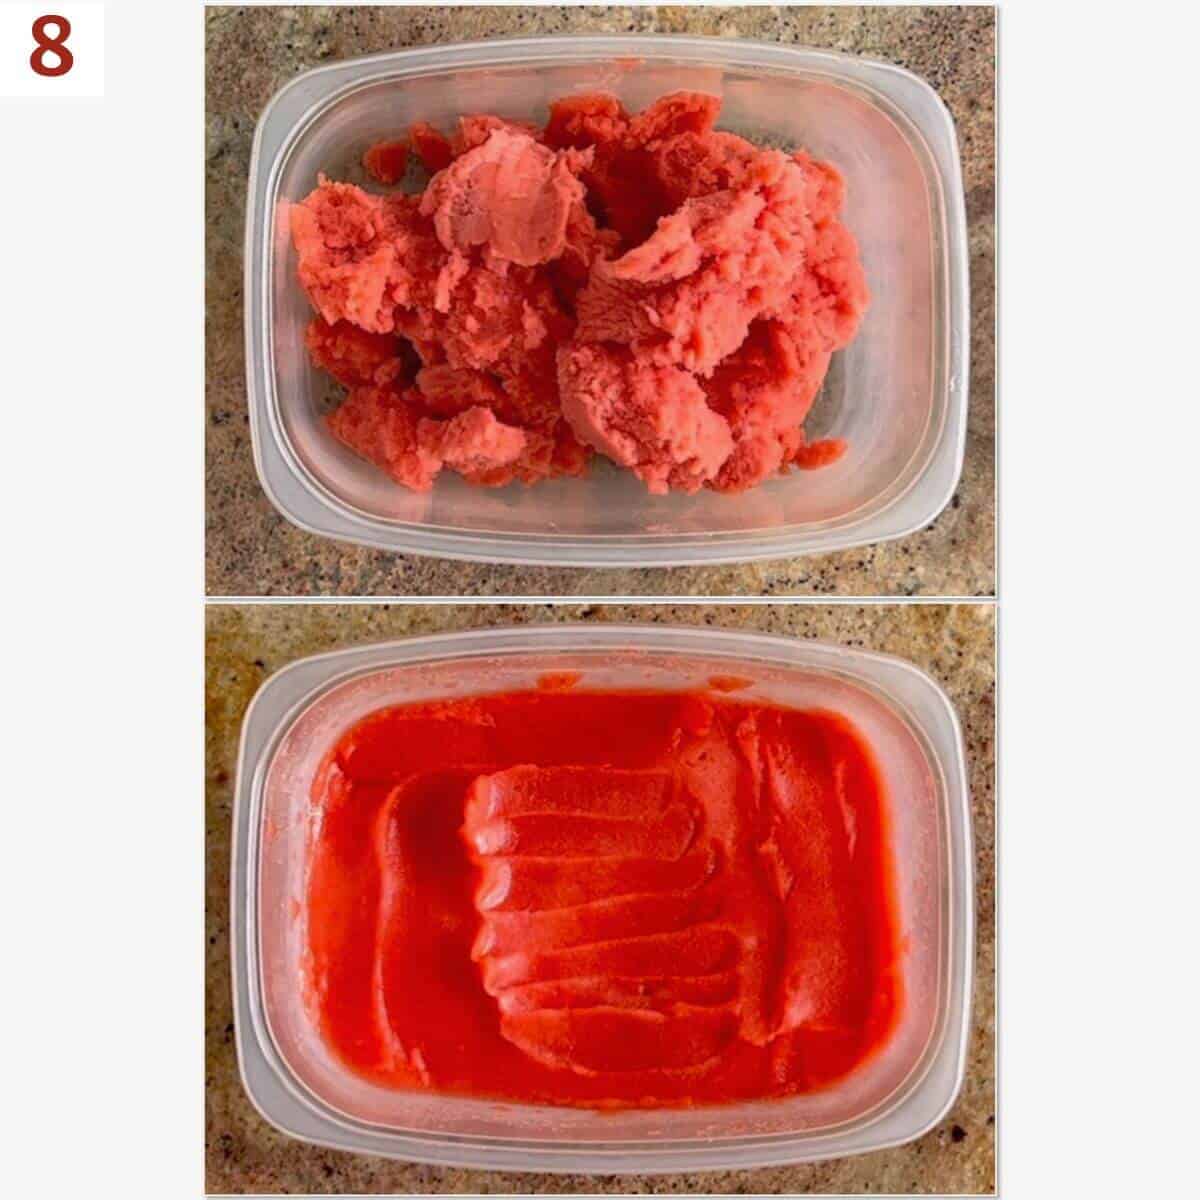 Collage of finished sorbet in a tub before and after smoothing the top.